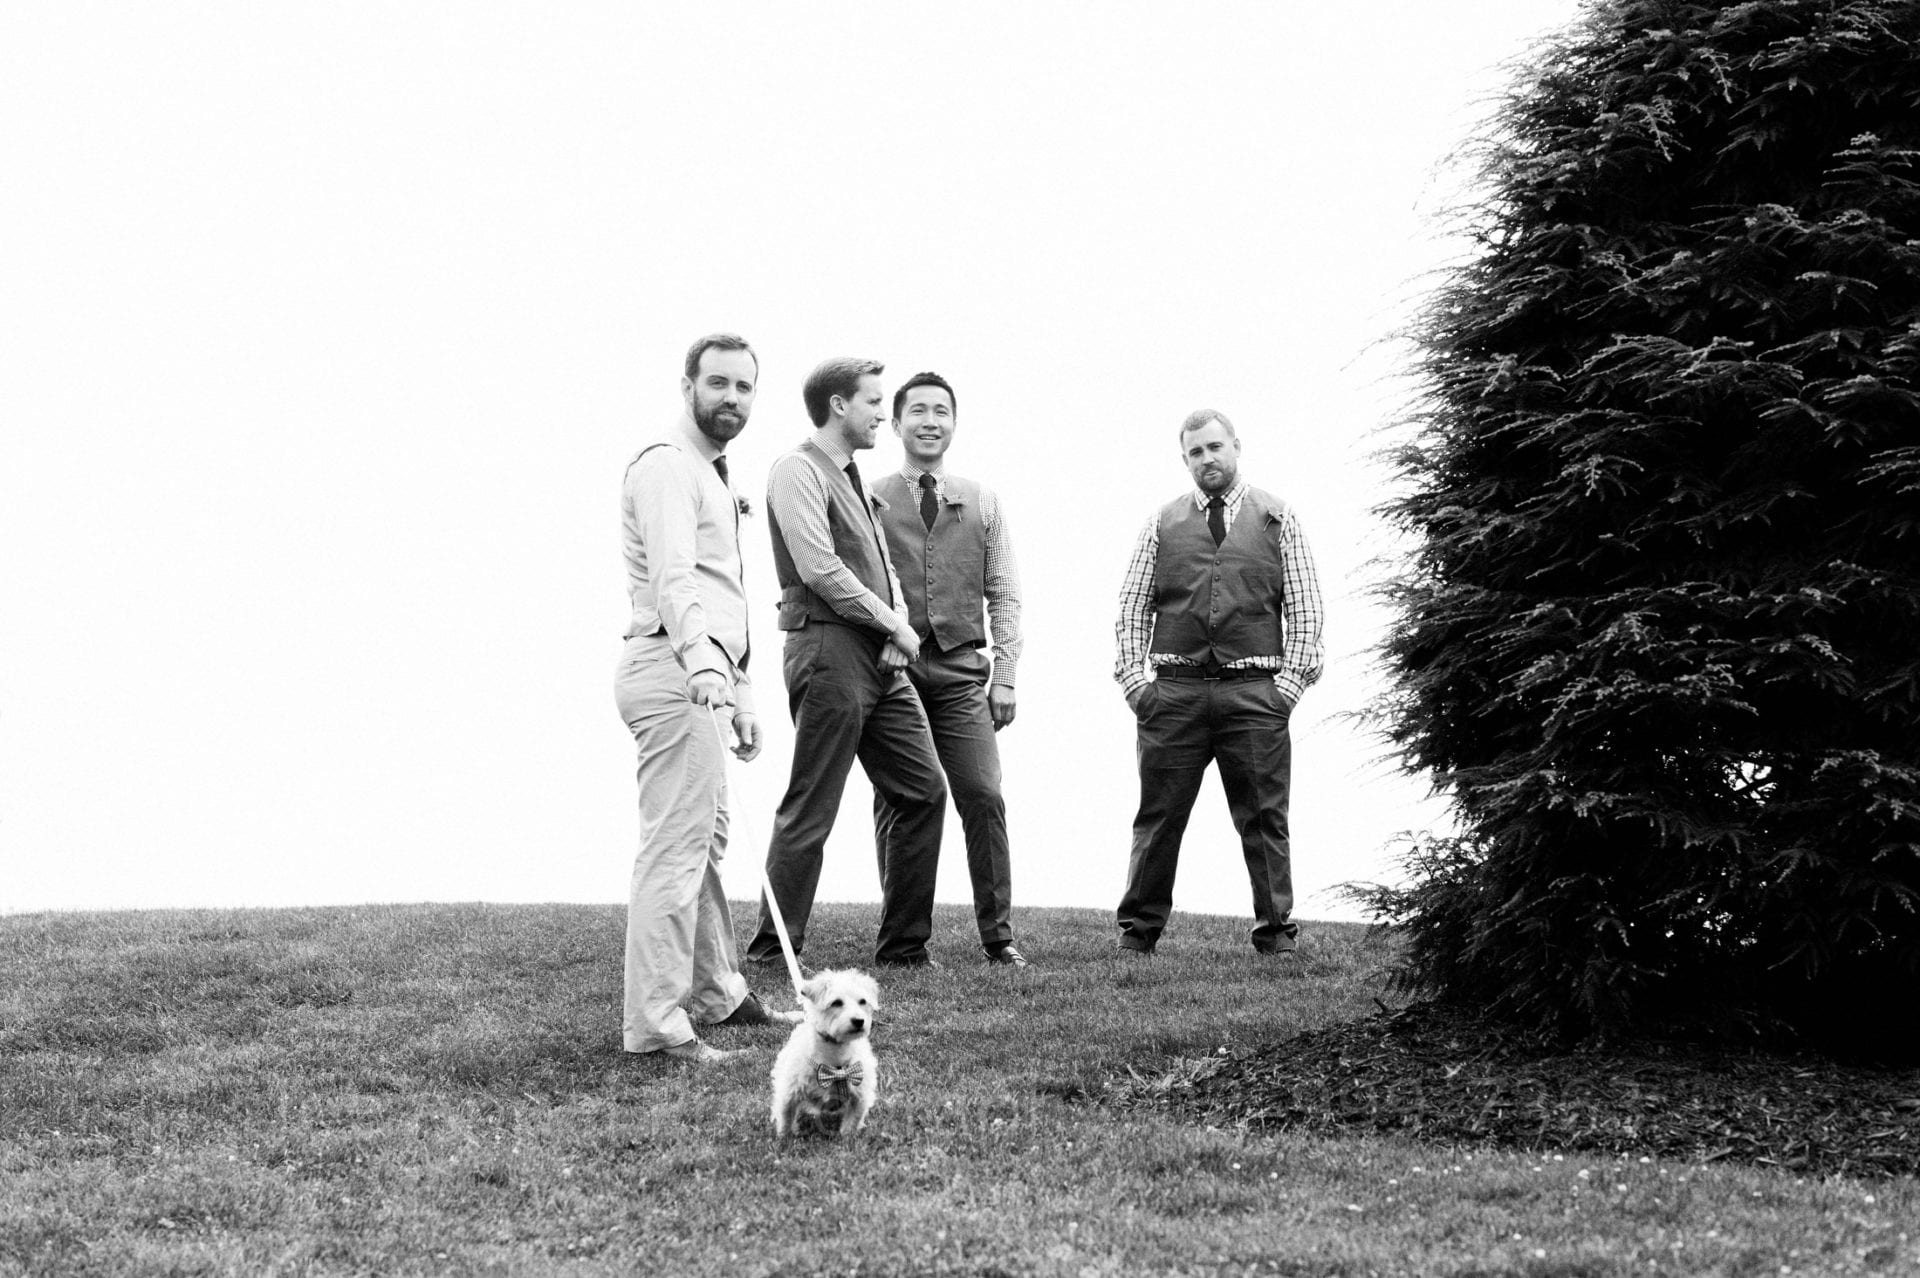 A groom stands at the top of a hill with three groomsmen. The groom holds the leash of his terrier as the dog strains against it.